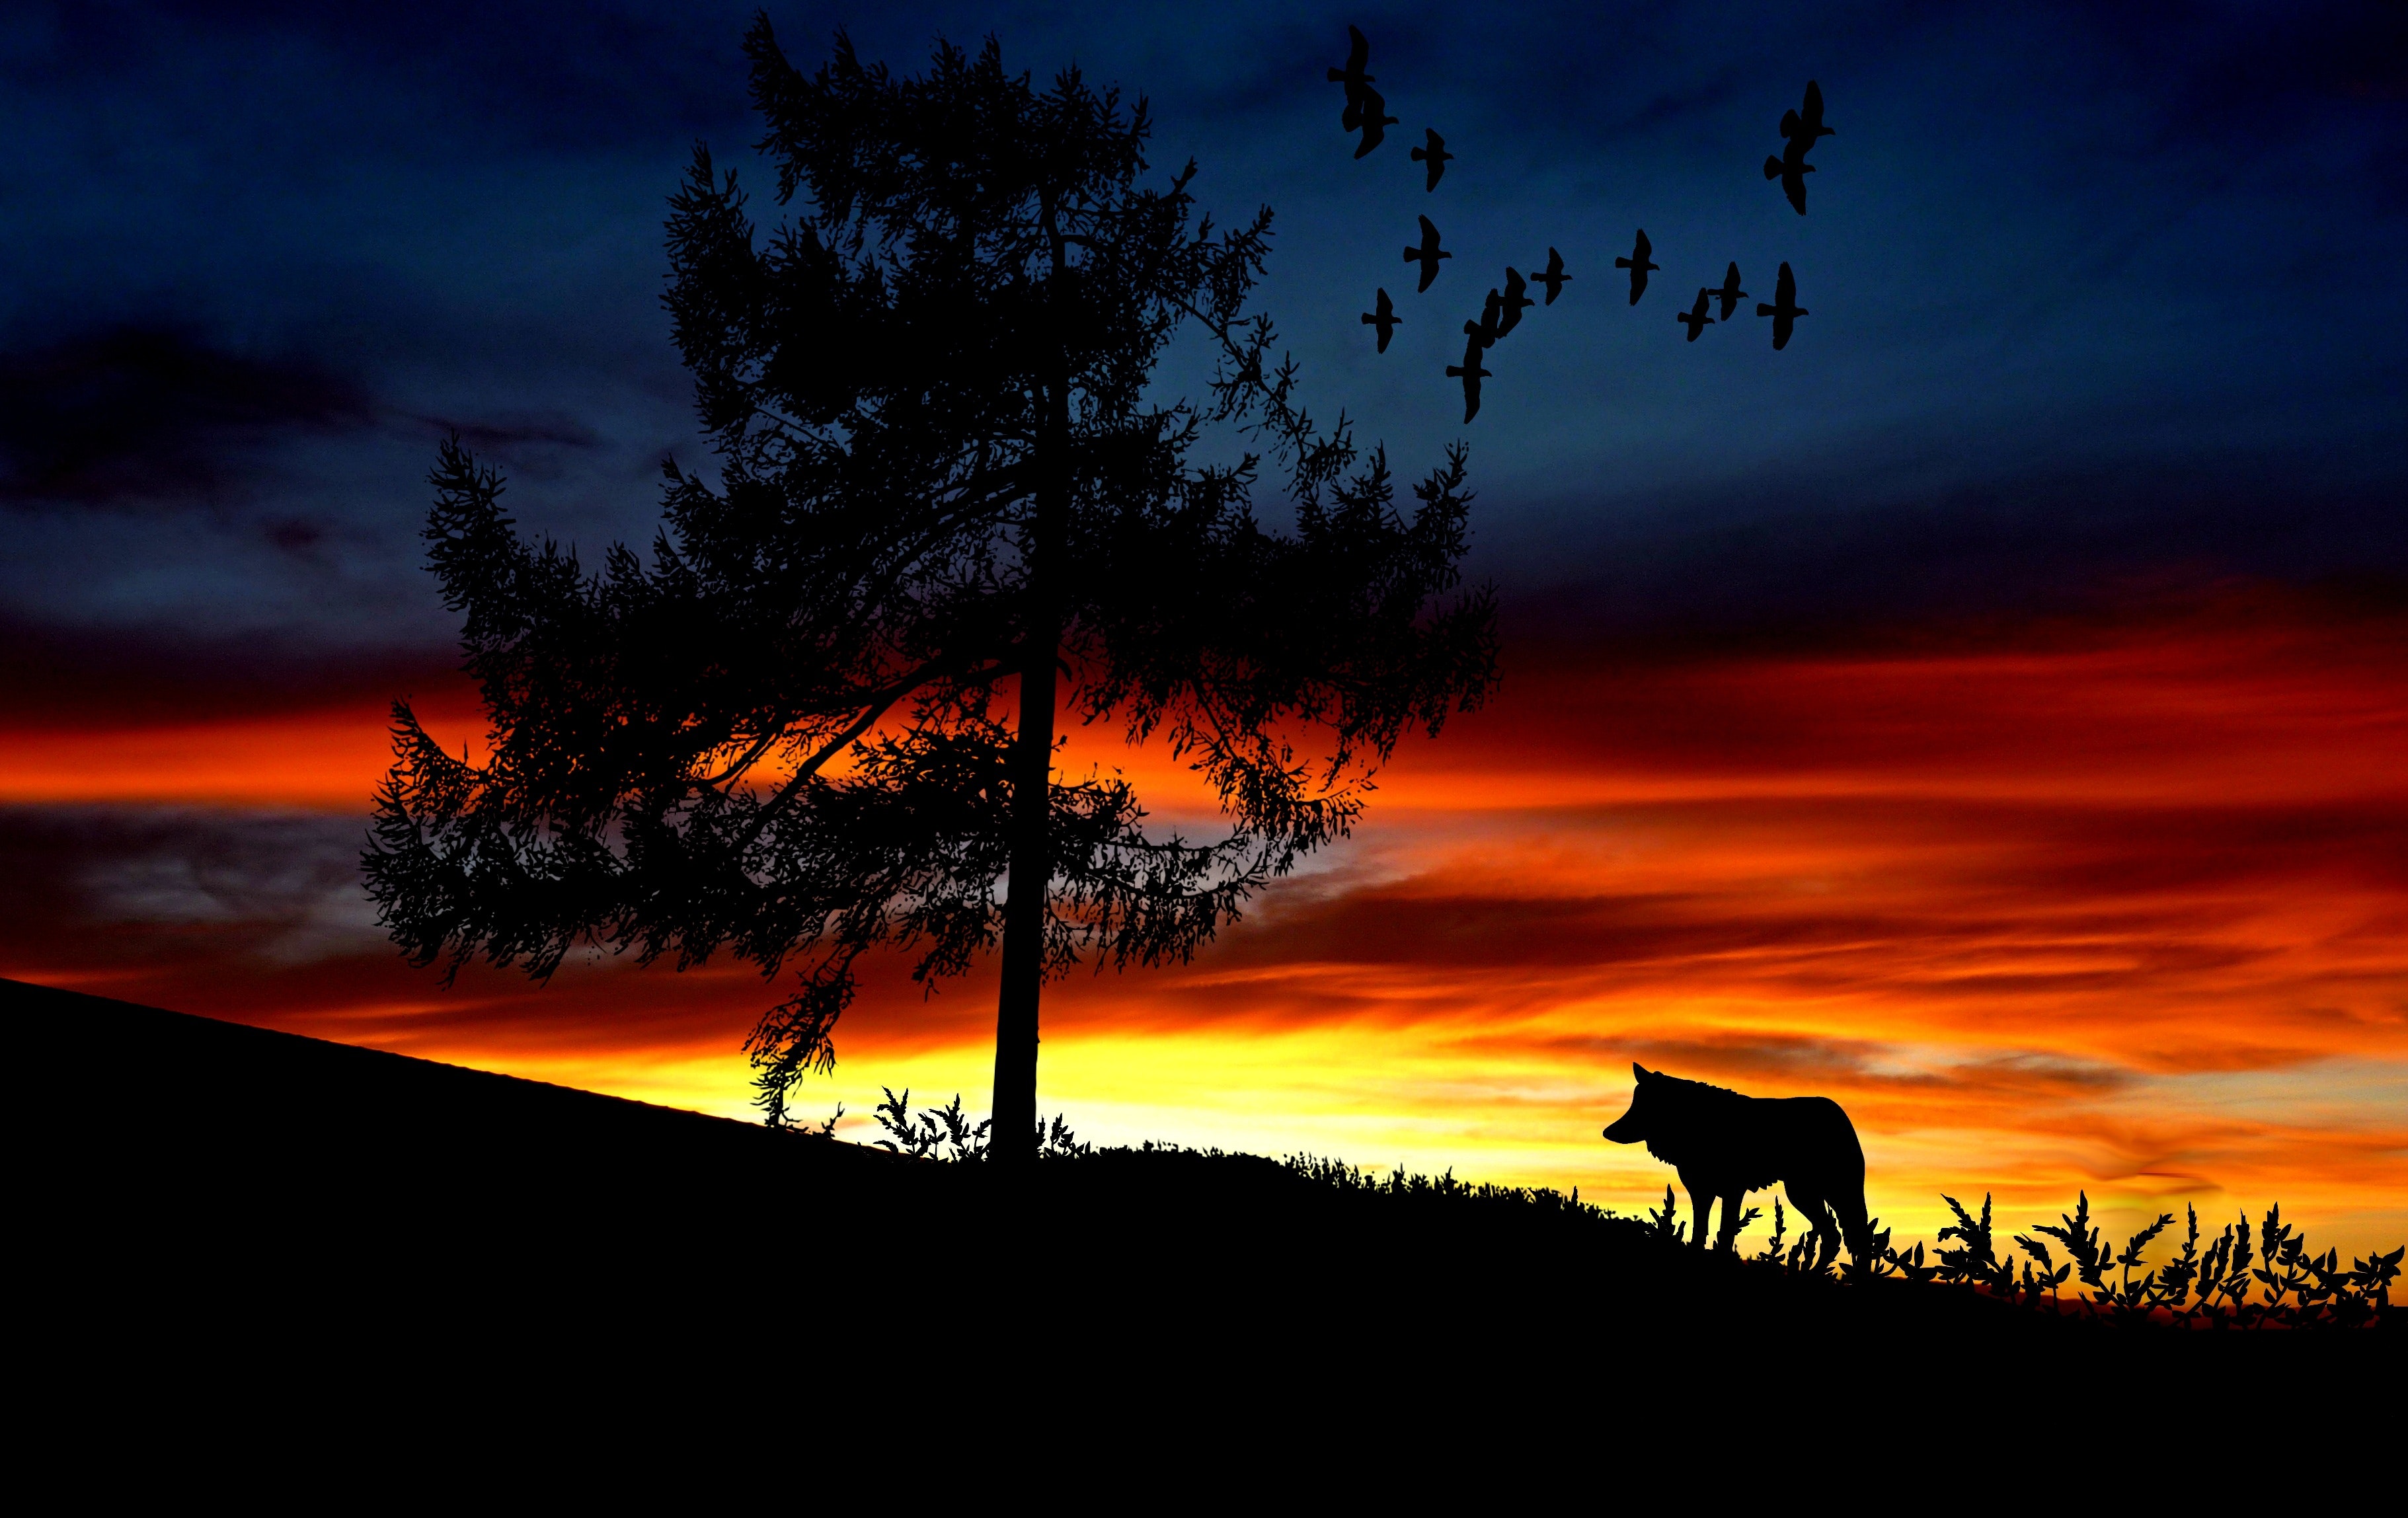 Silhouette dog on landscape against romantic sky at sunset photo